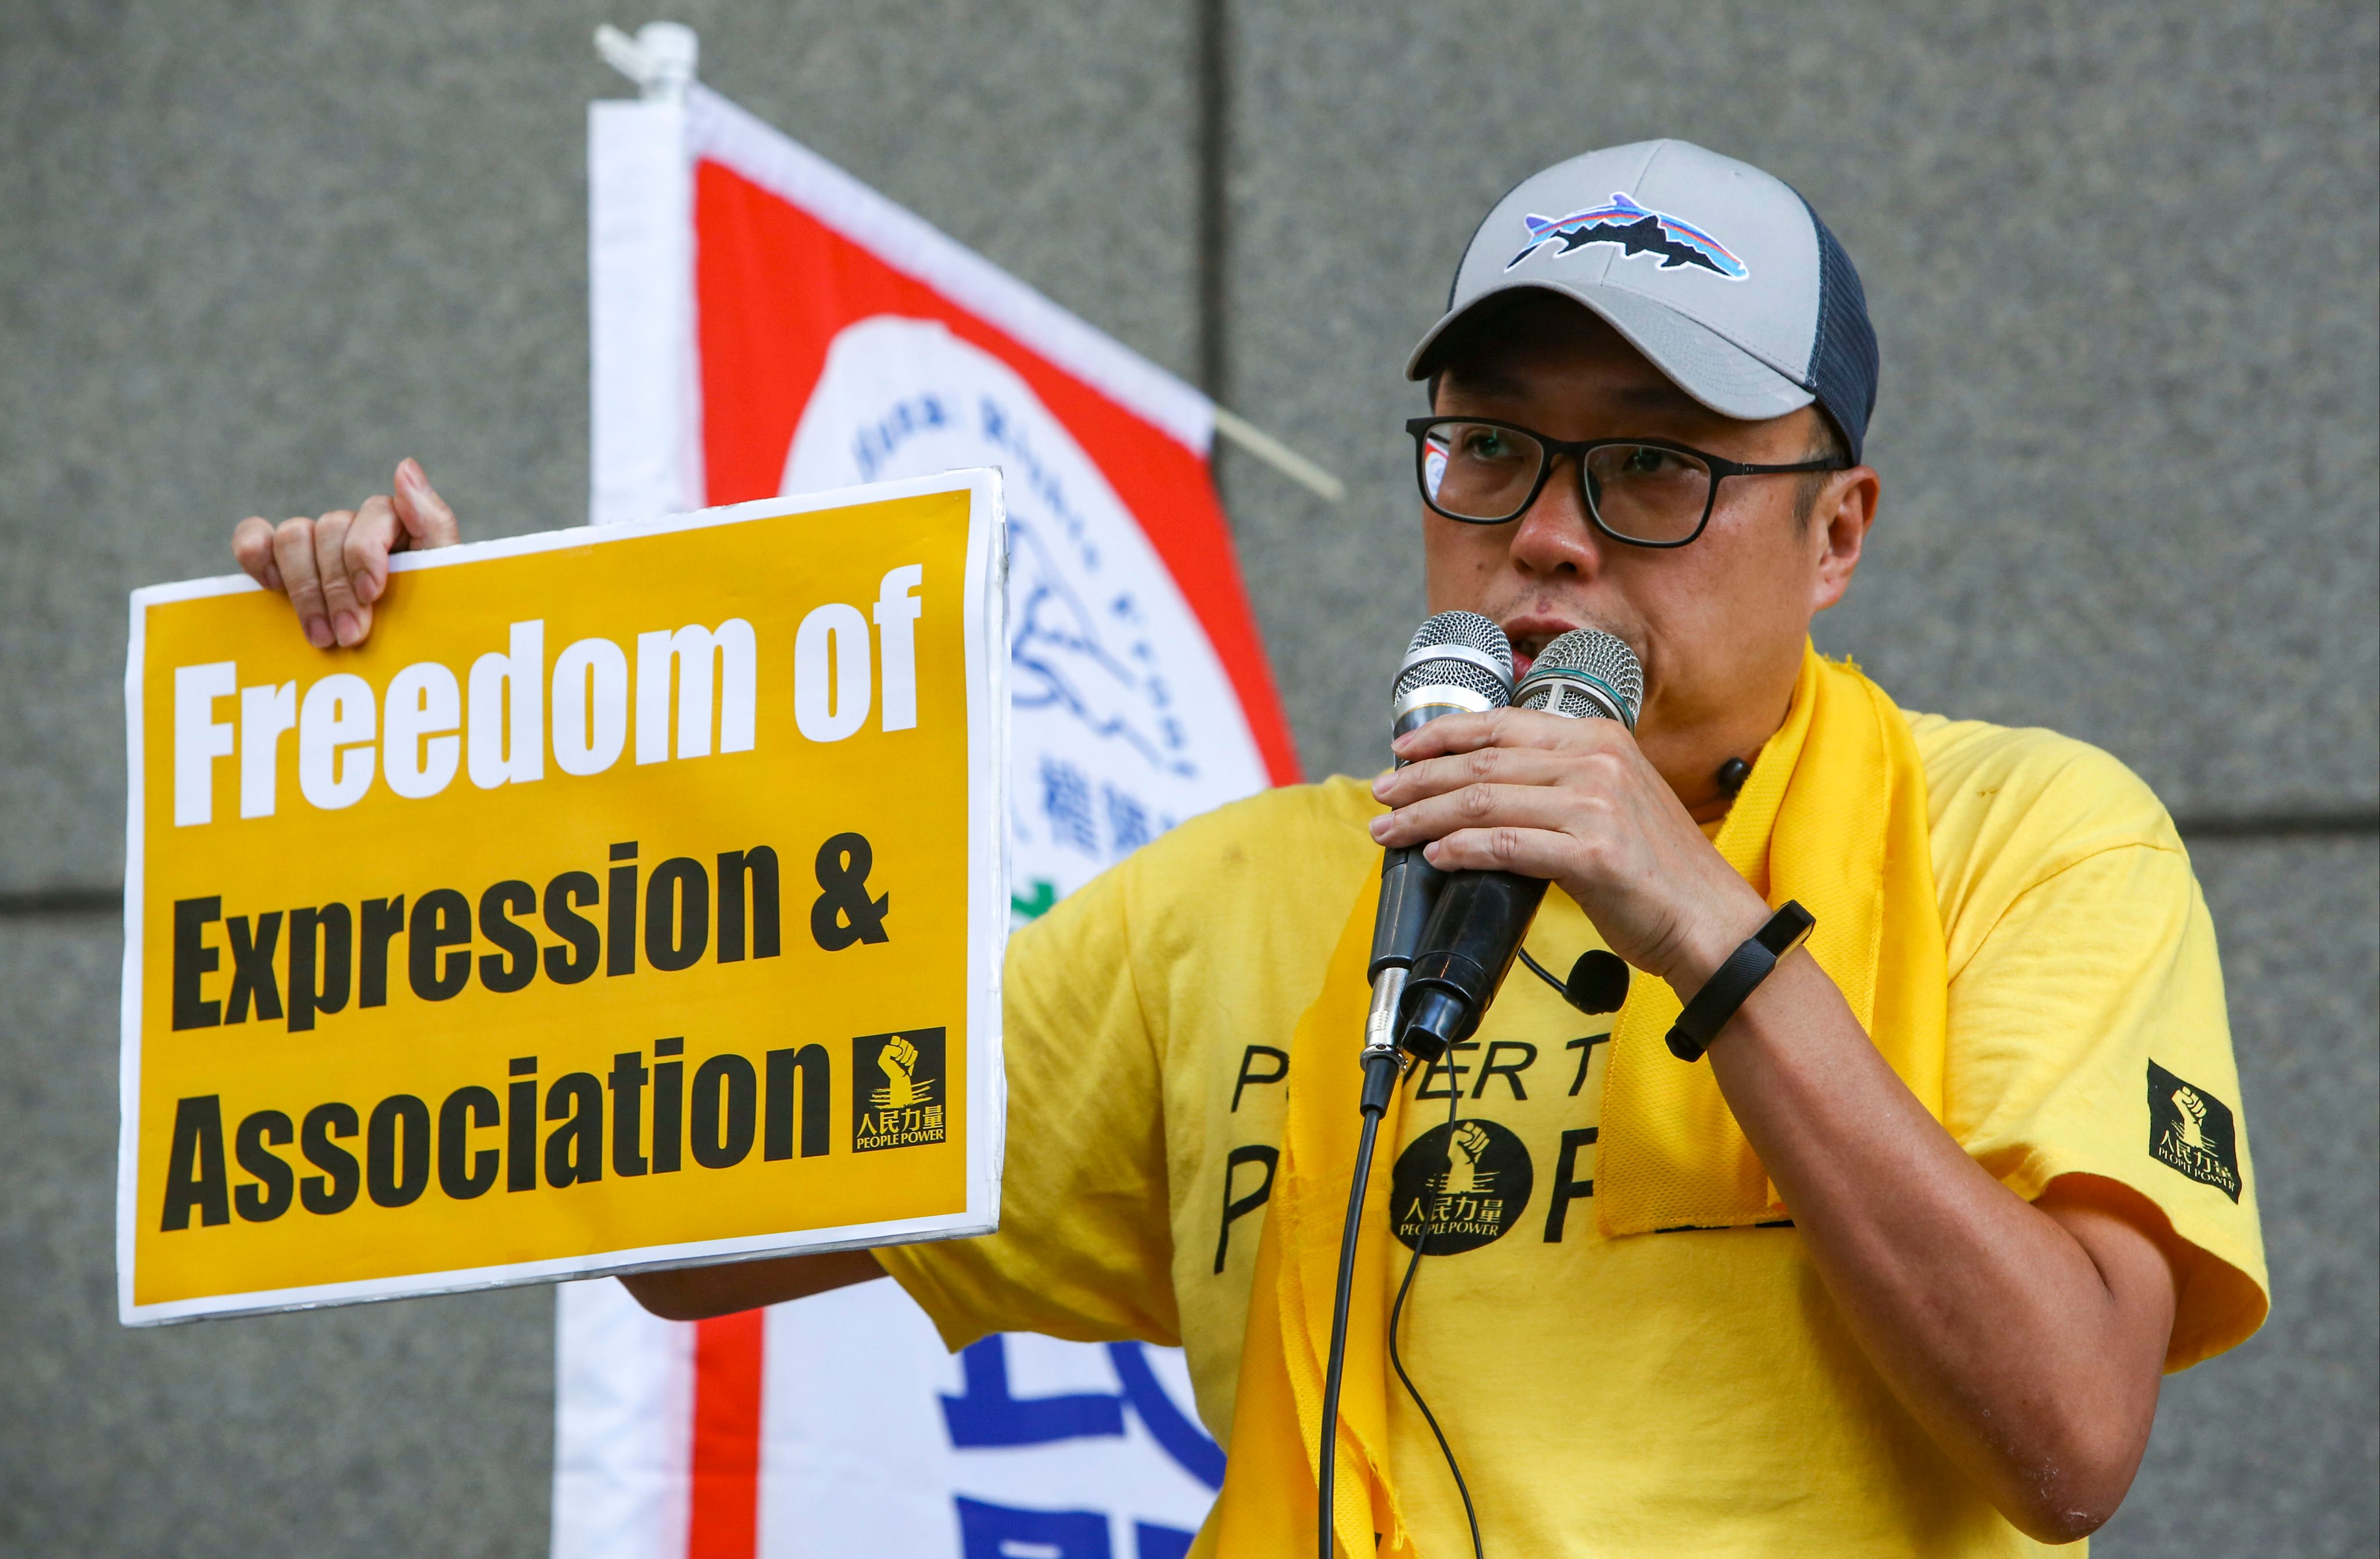 Former activist Tam Tak-chi speaks during a protest rally in 2018. Tam was found guilty of colonial-era sedition charges. Photo: Edmond So